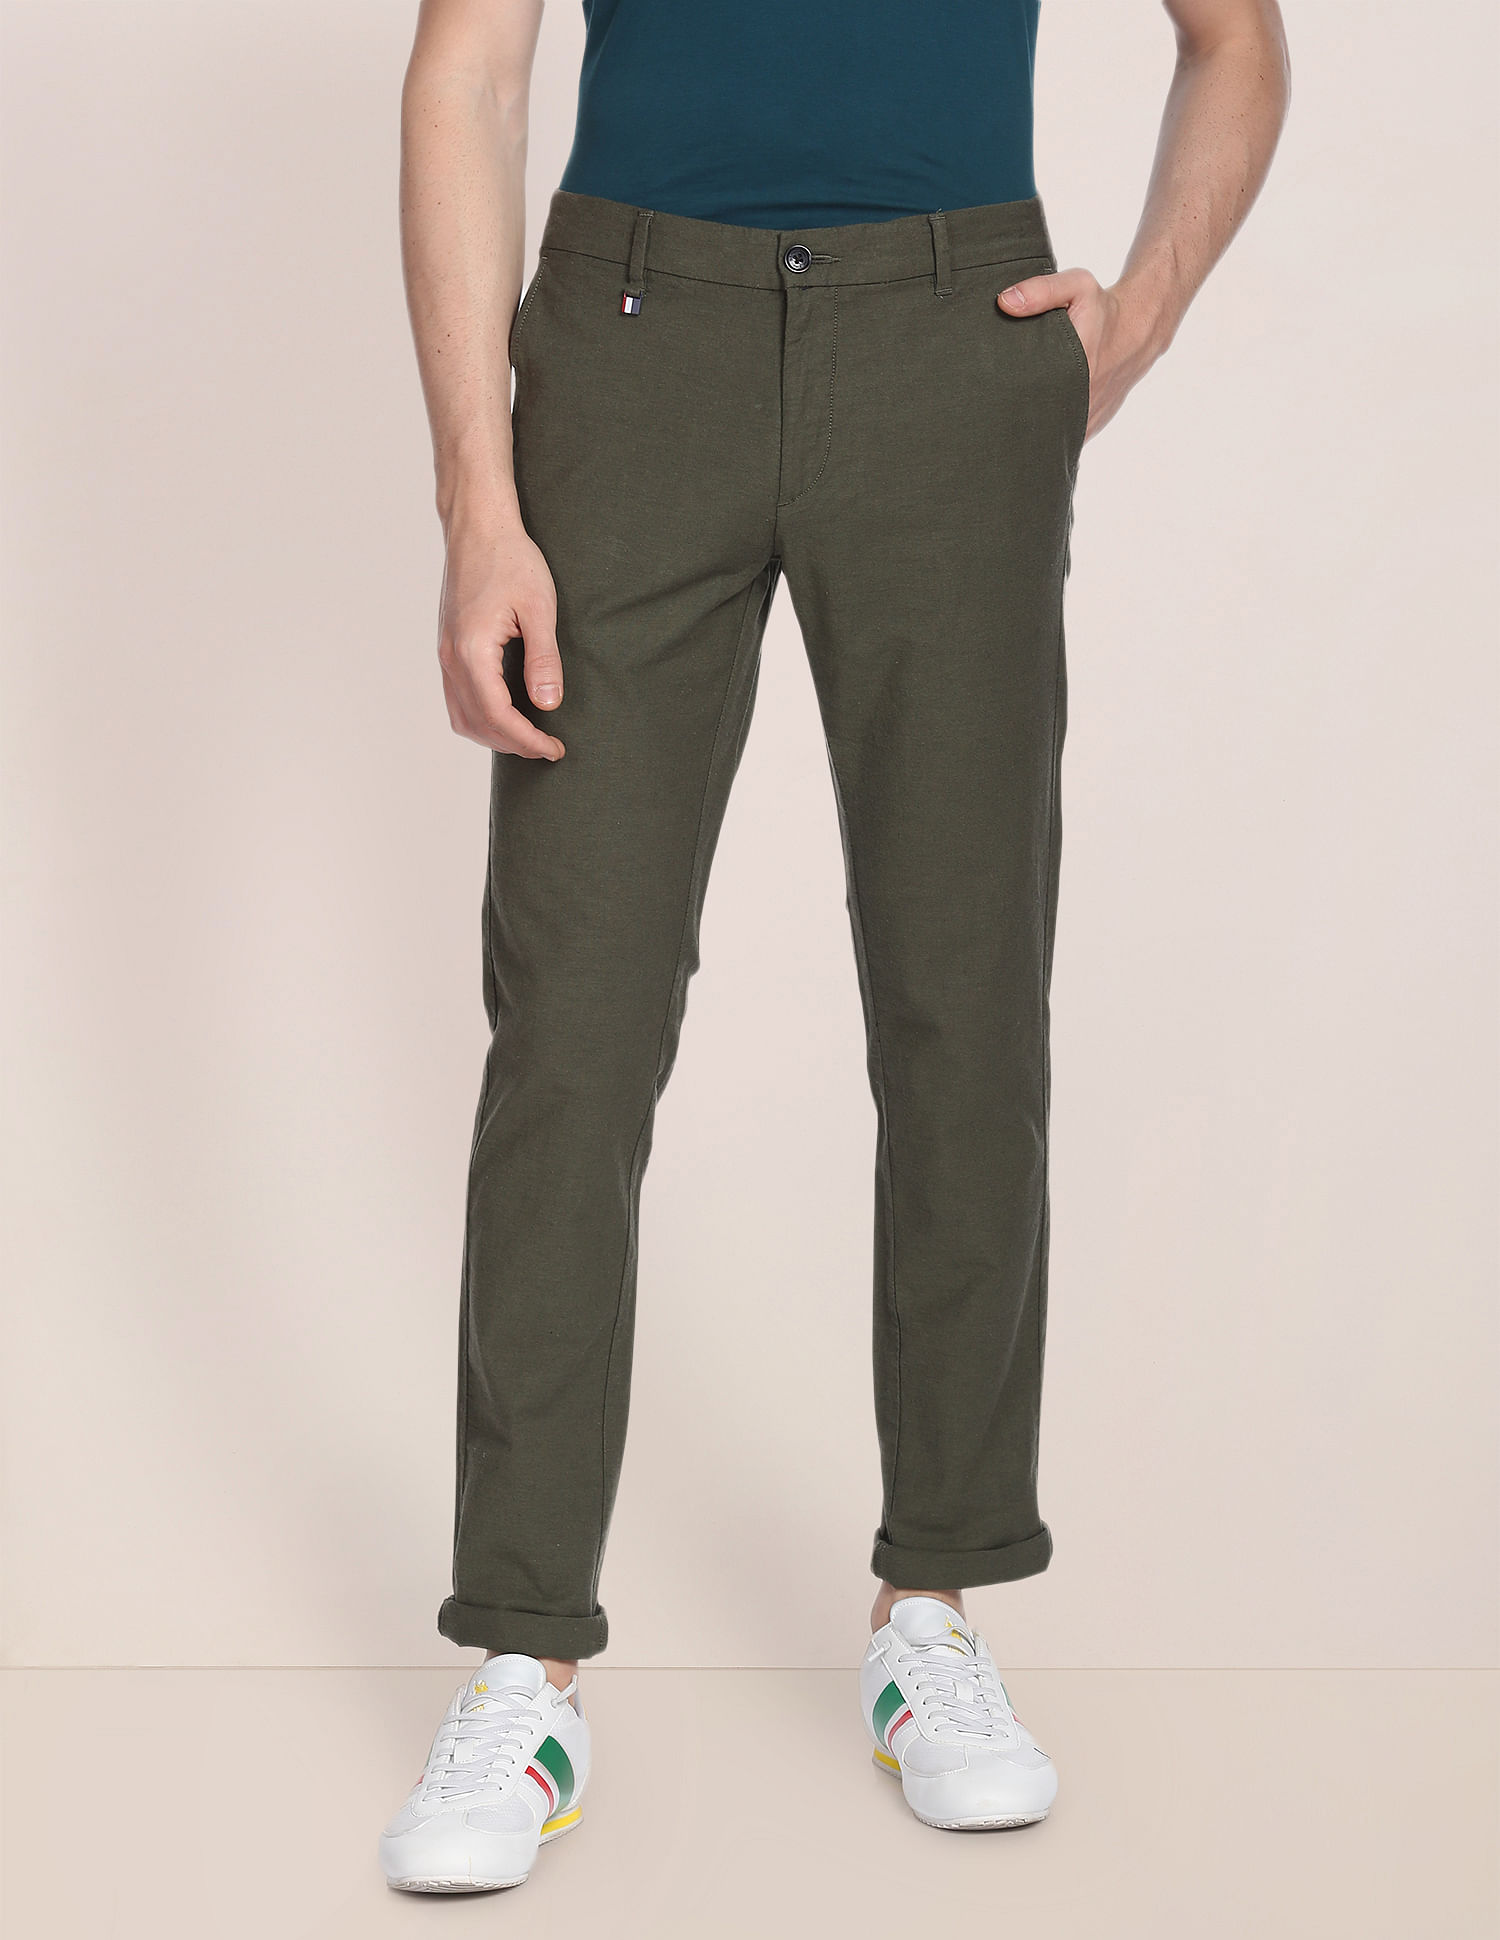 Polo Ralph Lauren Men's Stretch Straight Fit Chino Pants - Macy's